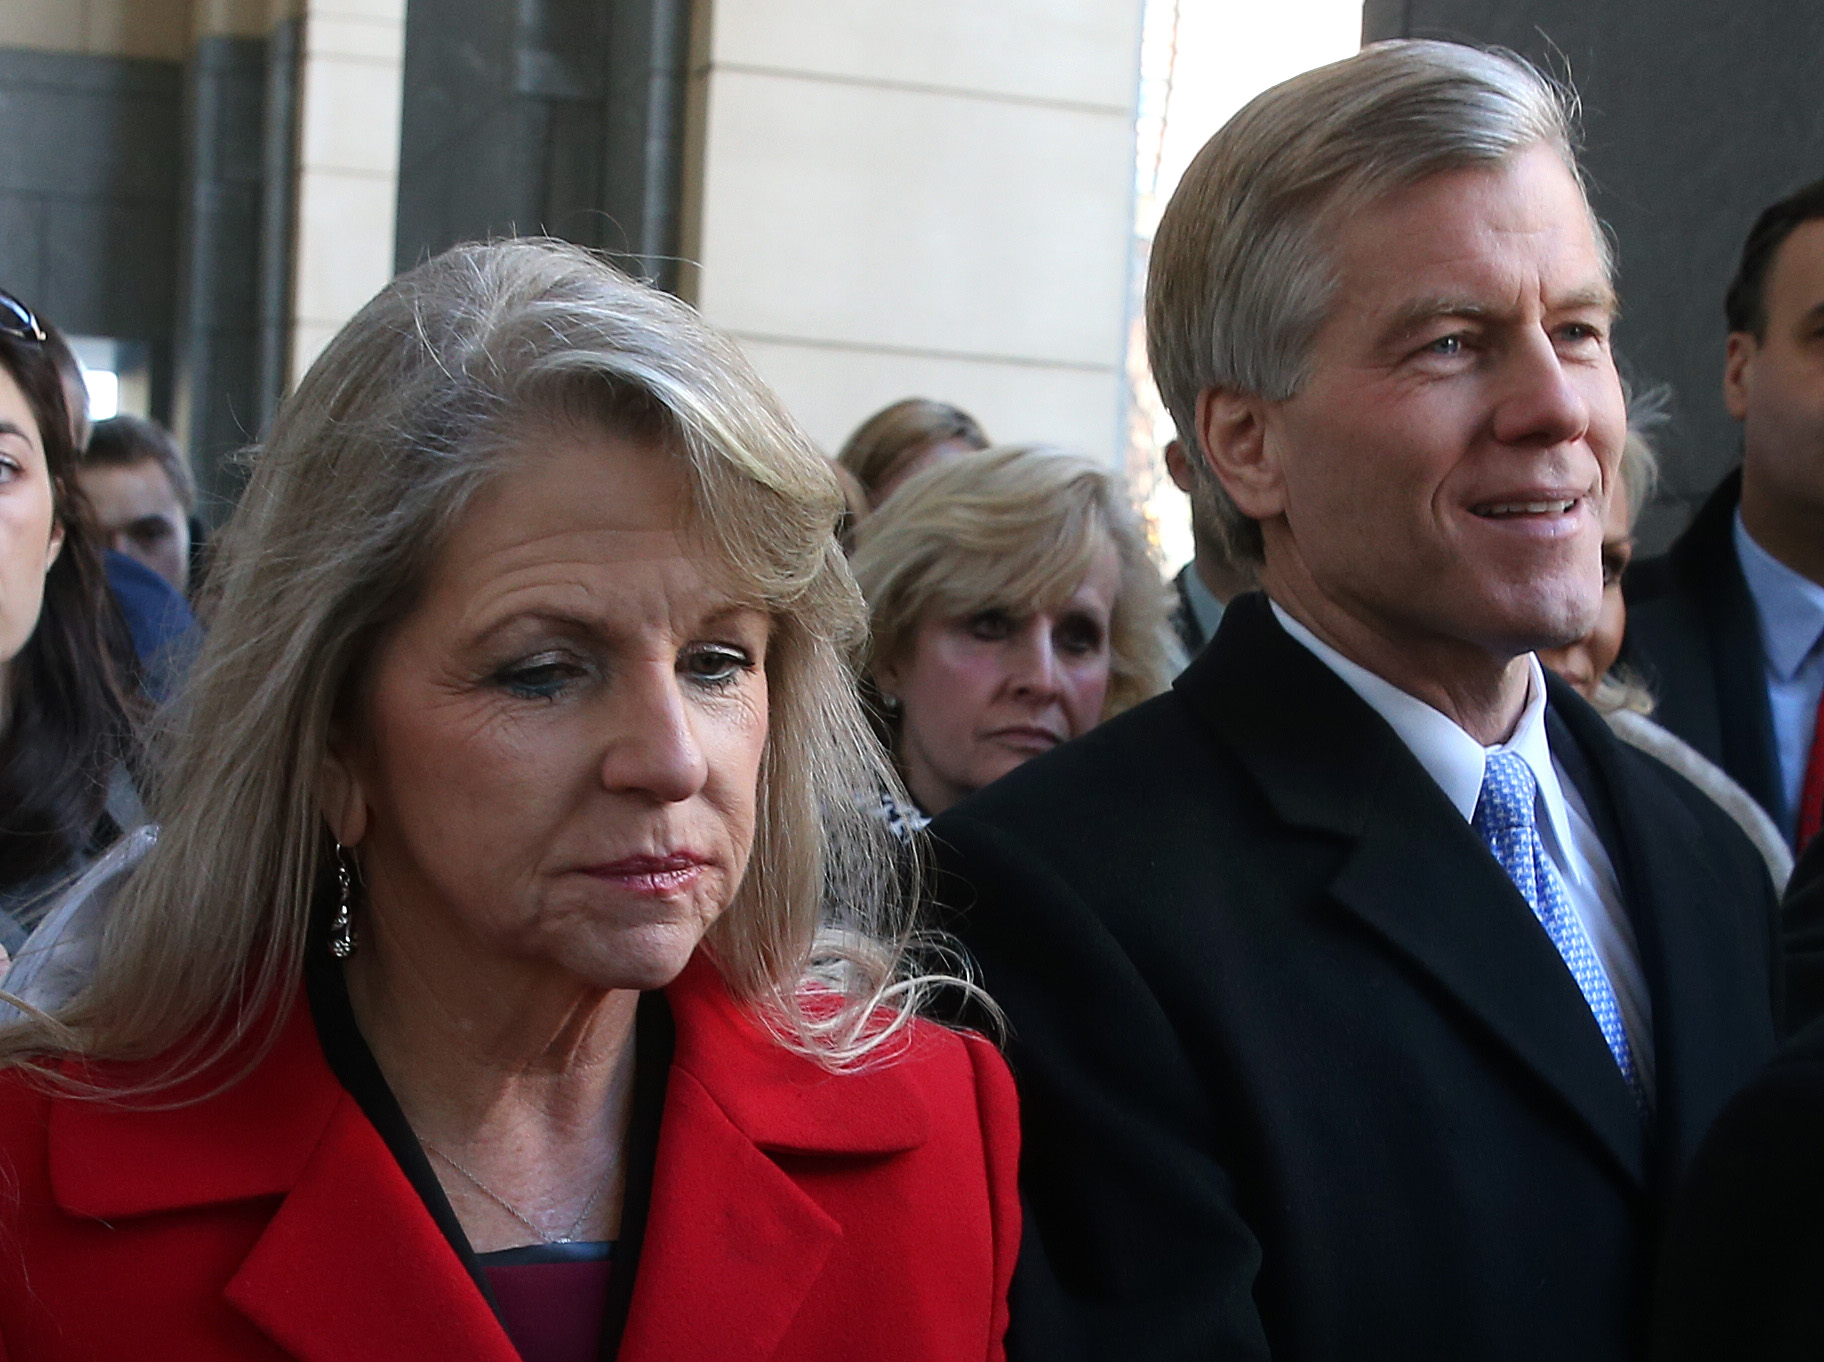 Former Virginia governor Bob McDonnell and his wife Maureen leave the court in Richmond, Va., on Jan. 24, 2014 (Mark Wilson—Getty Images)